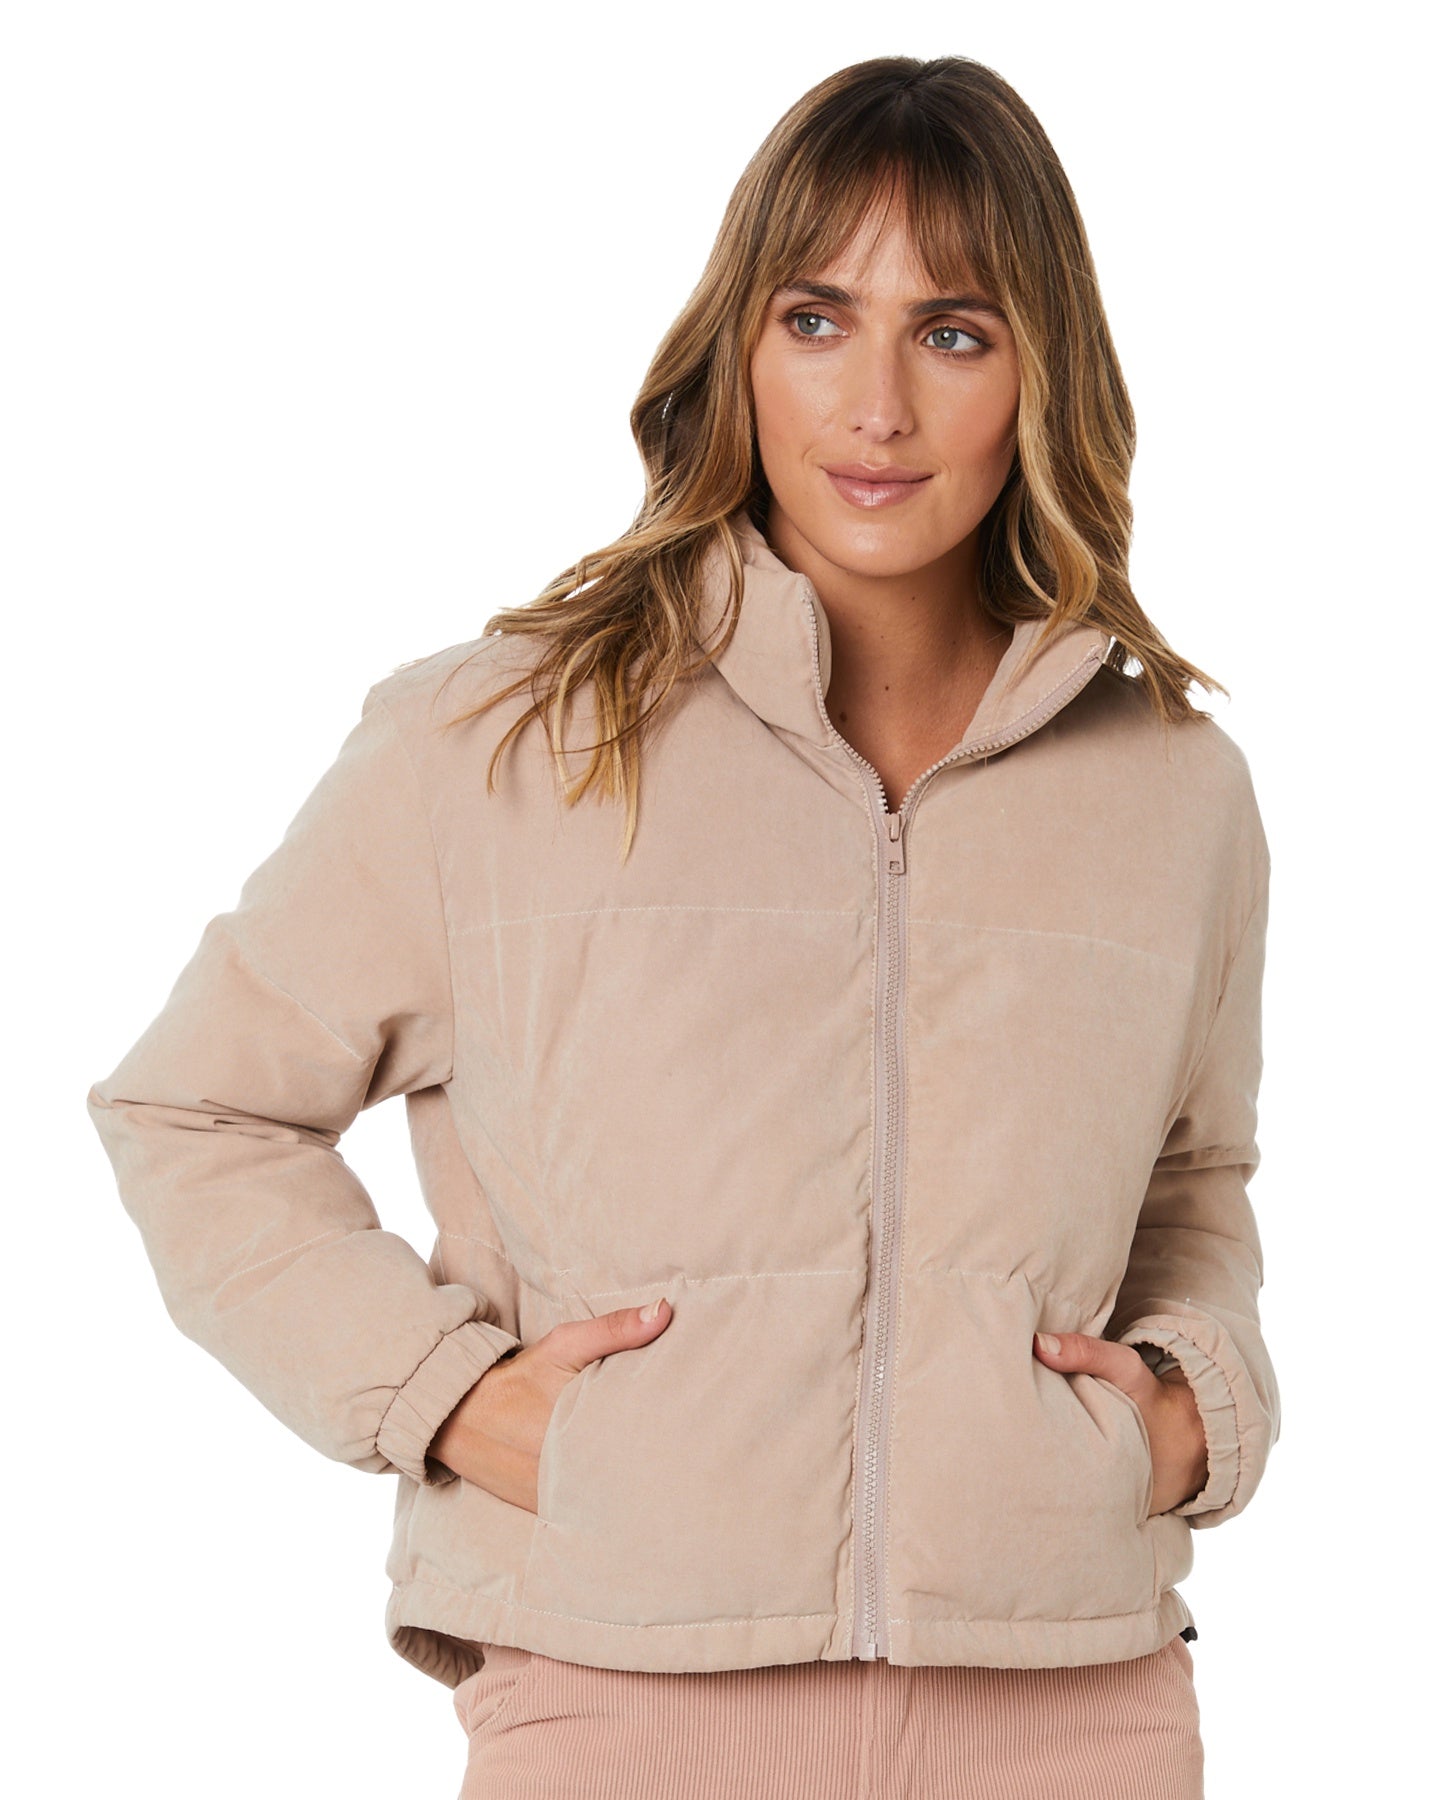 Margs Puffer Jacket